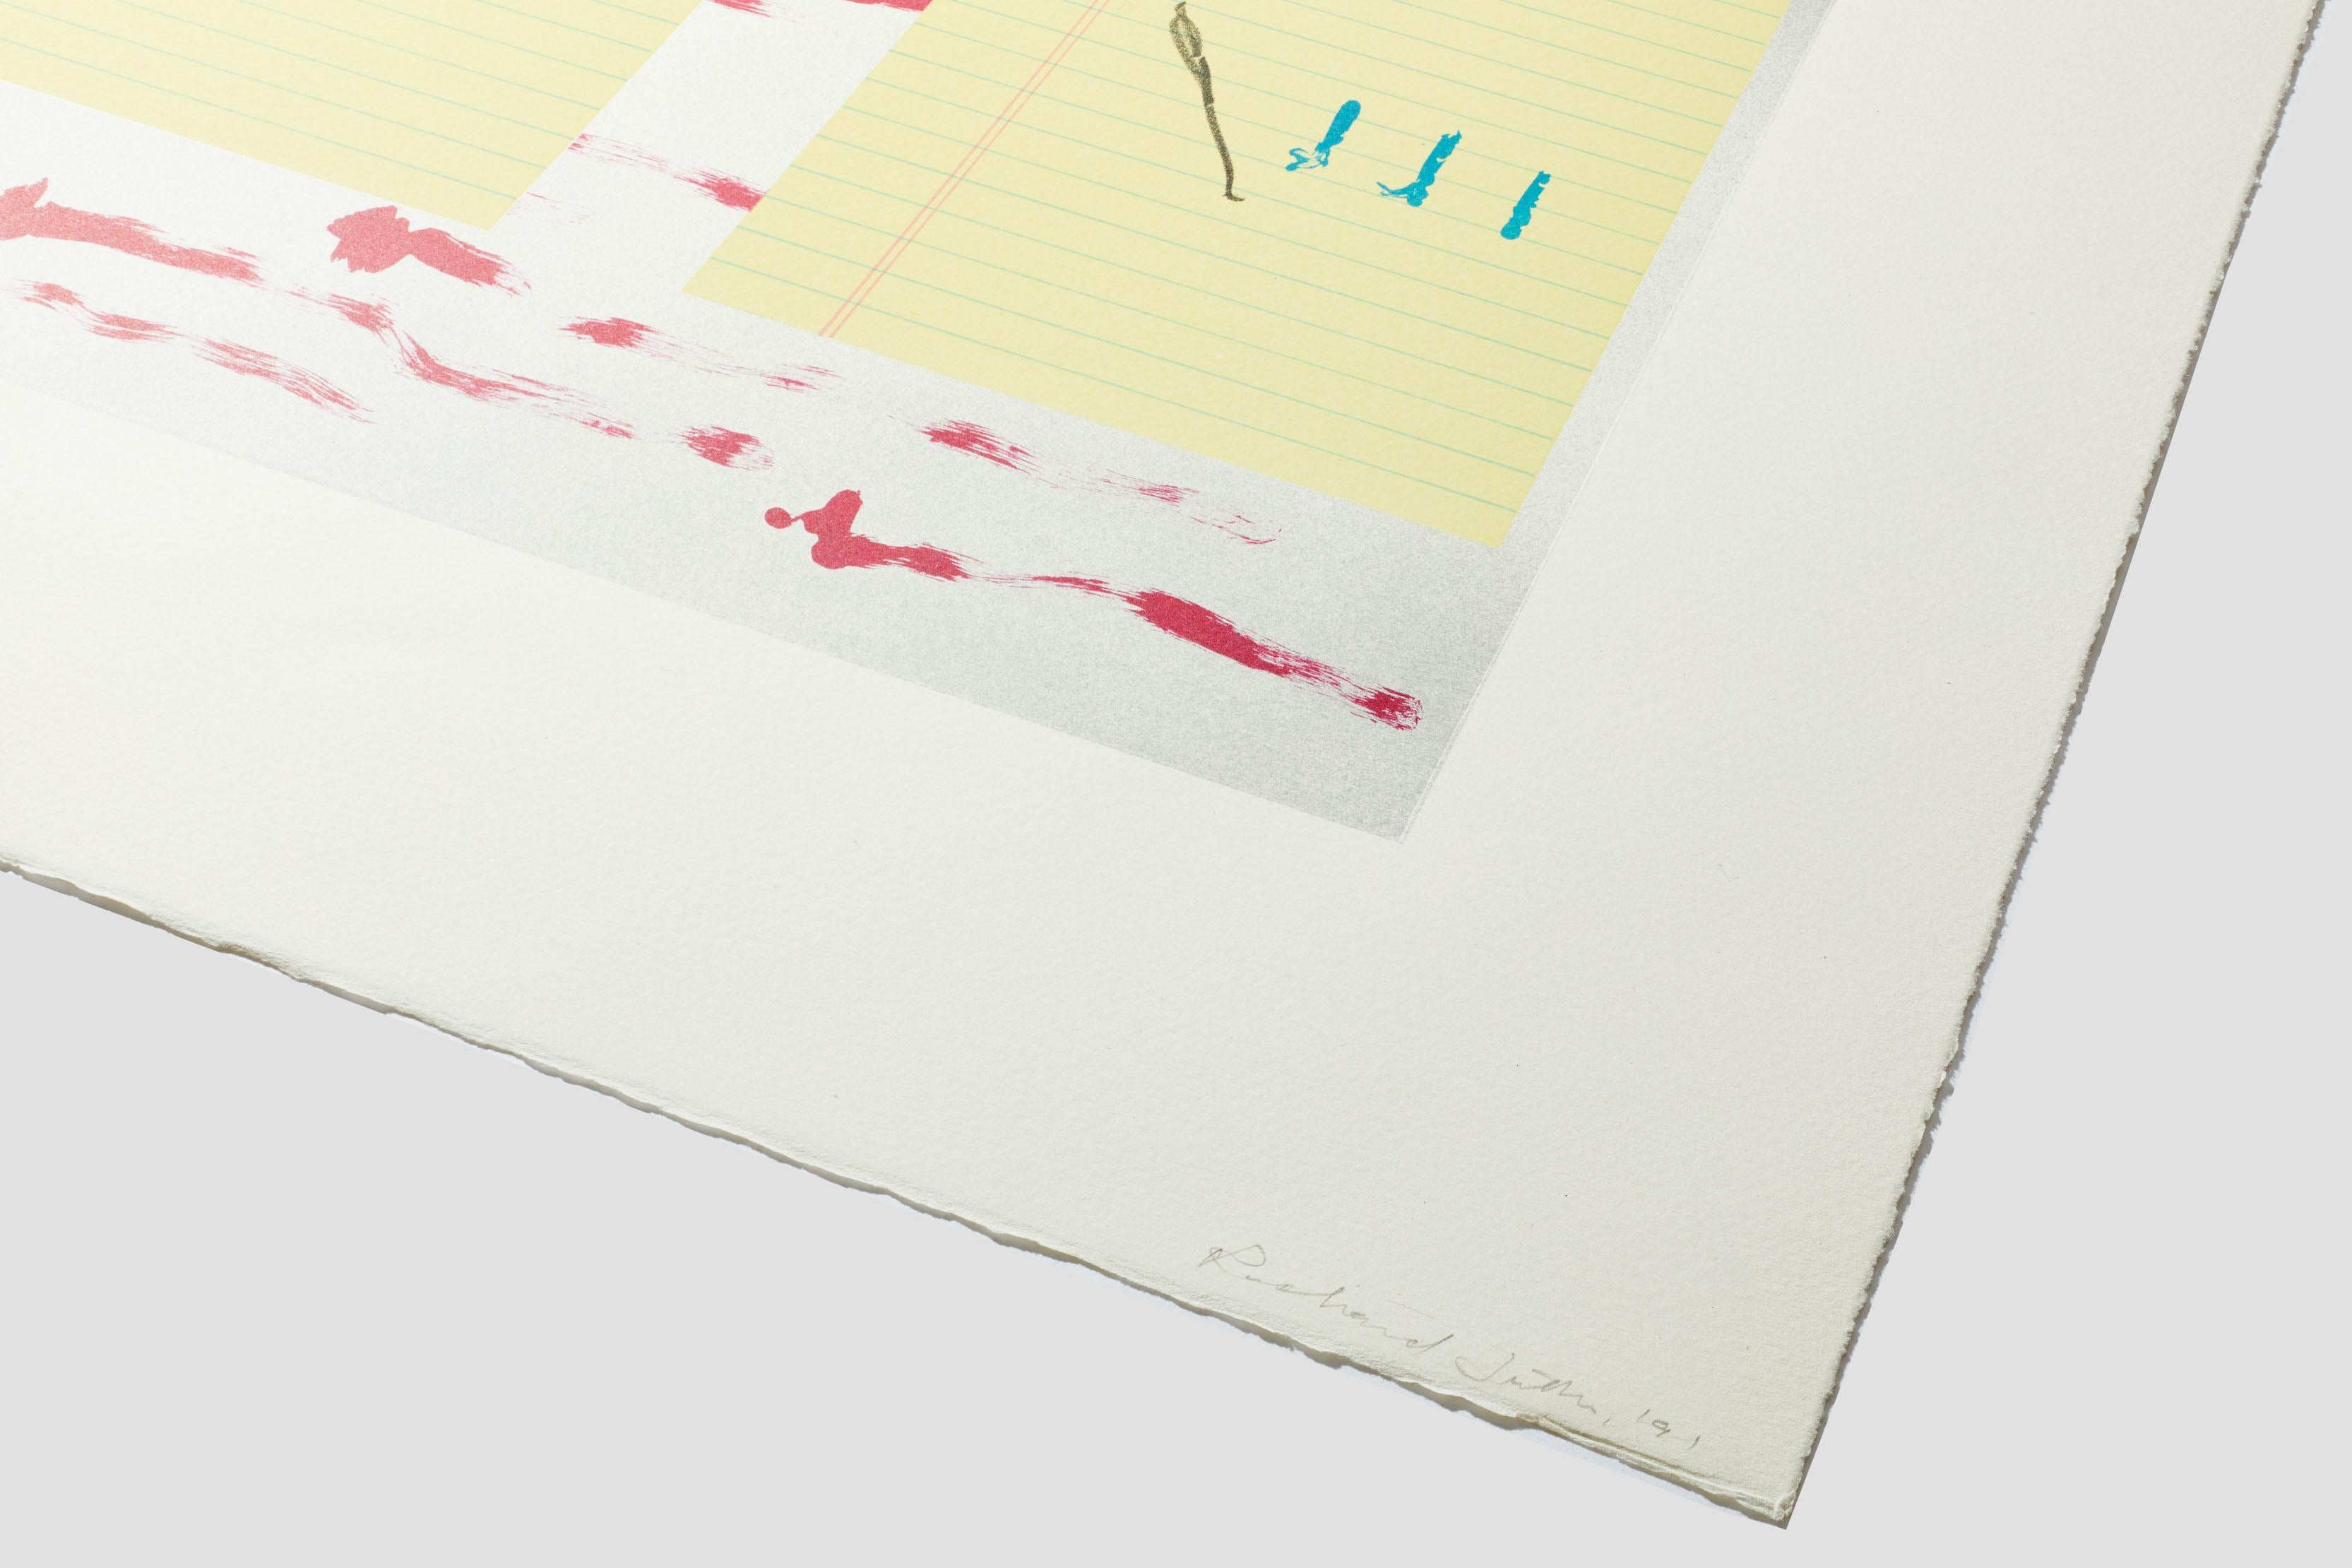 A Sunny Day - Conceptual Print by Richard Tuttle